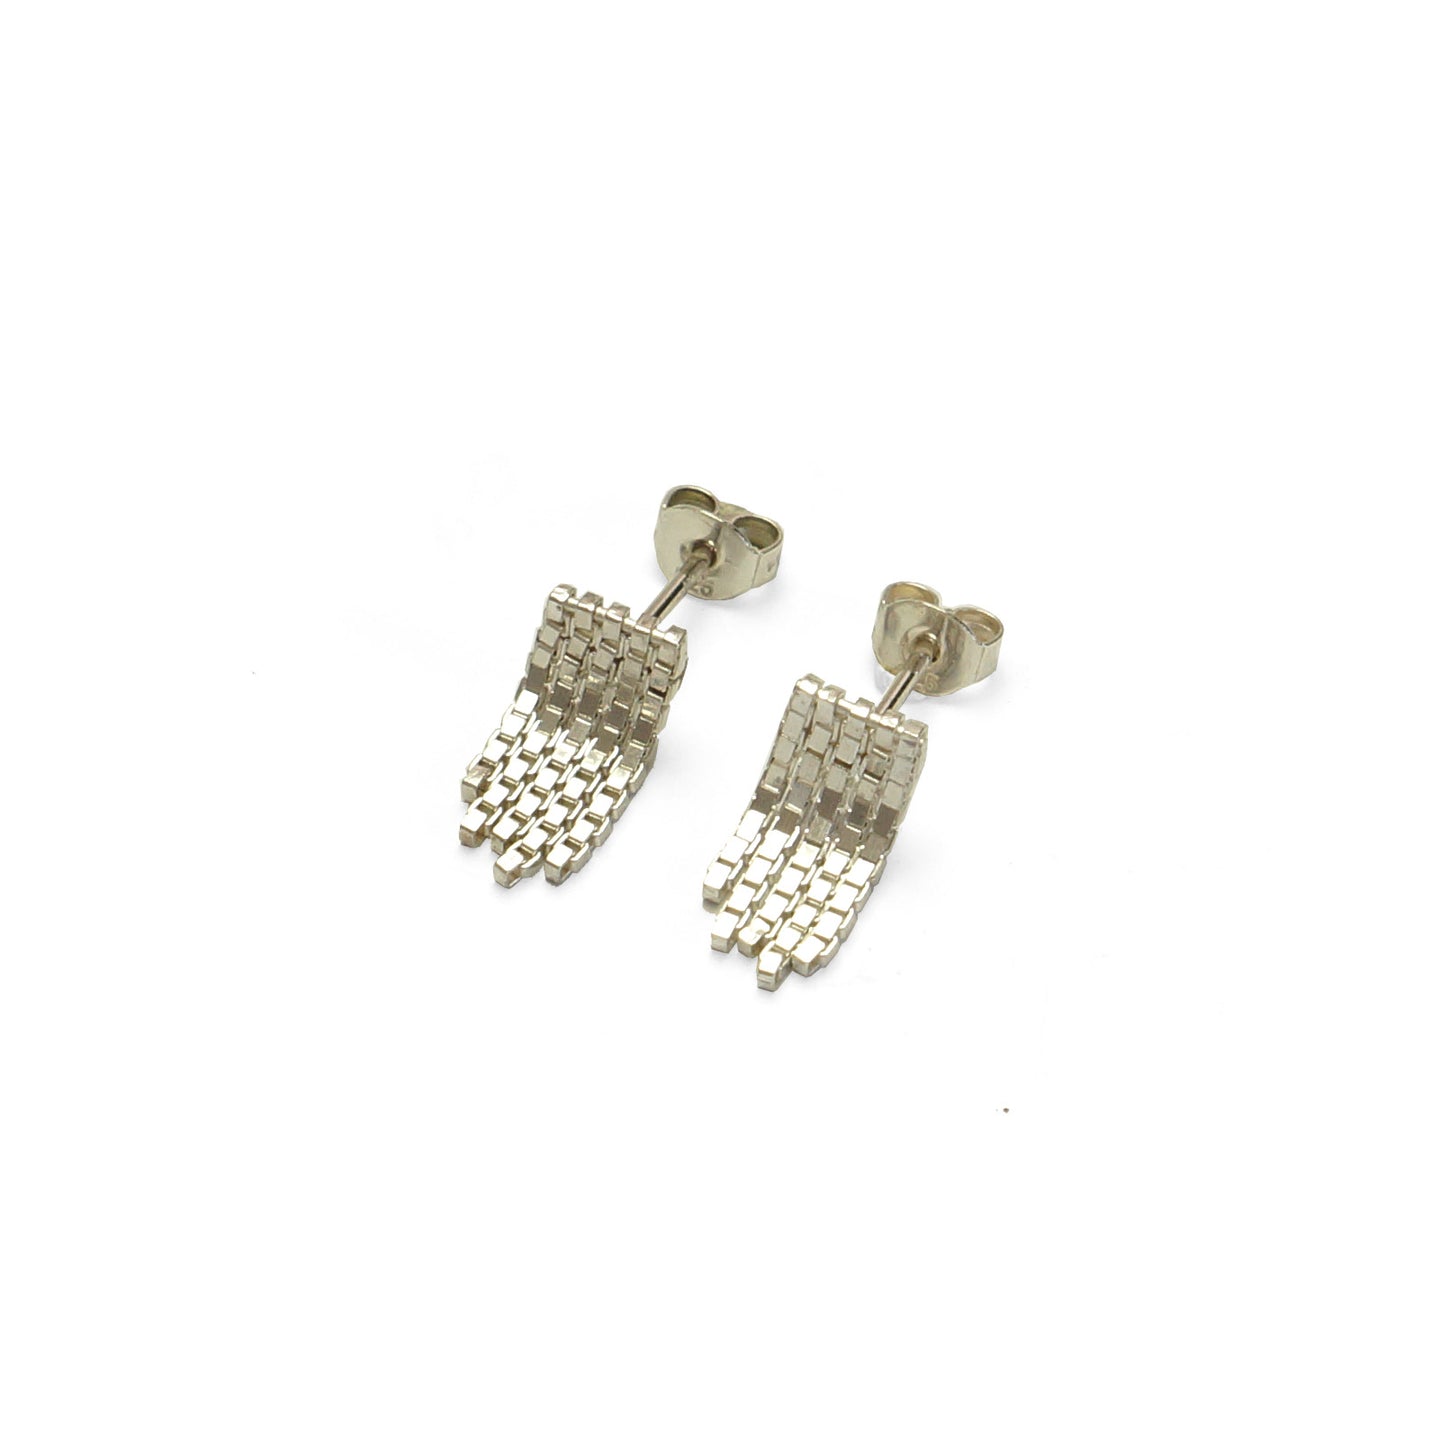 Martine Viergever - Earring - Disco small - silver